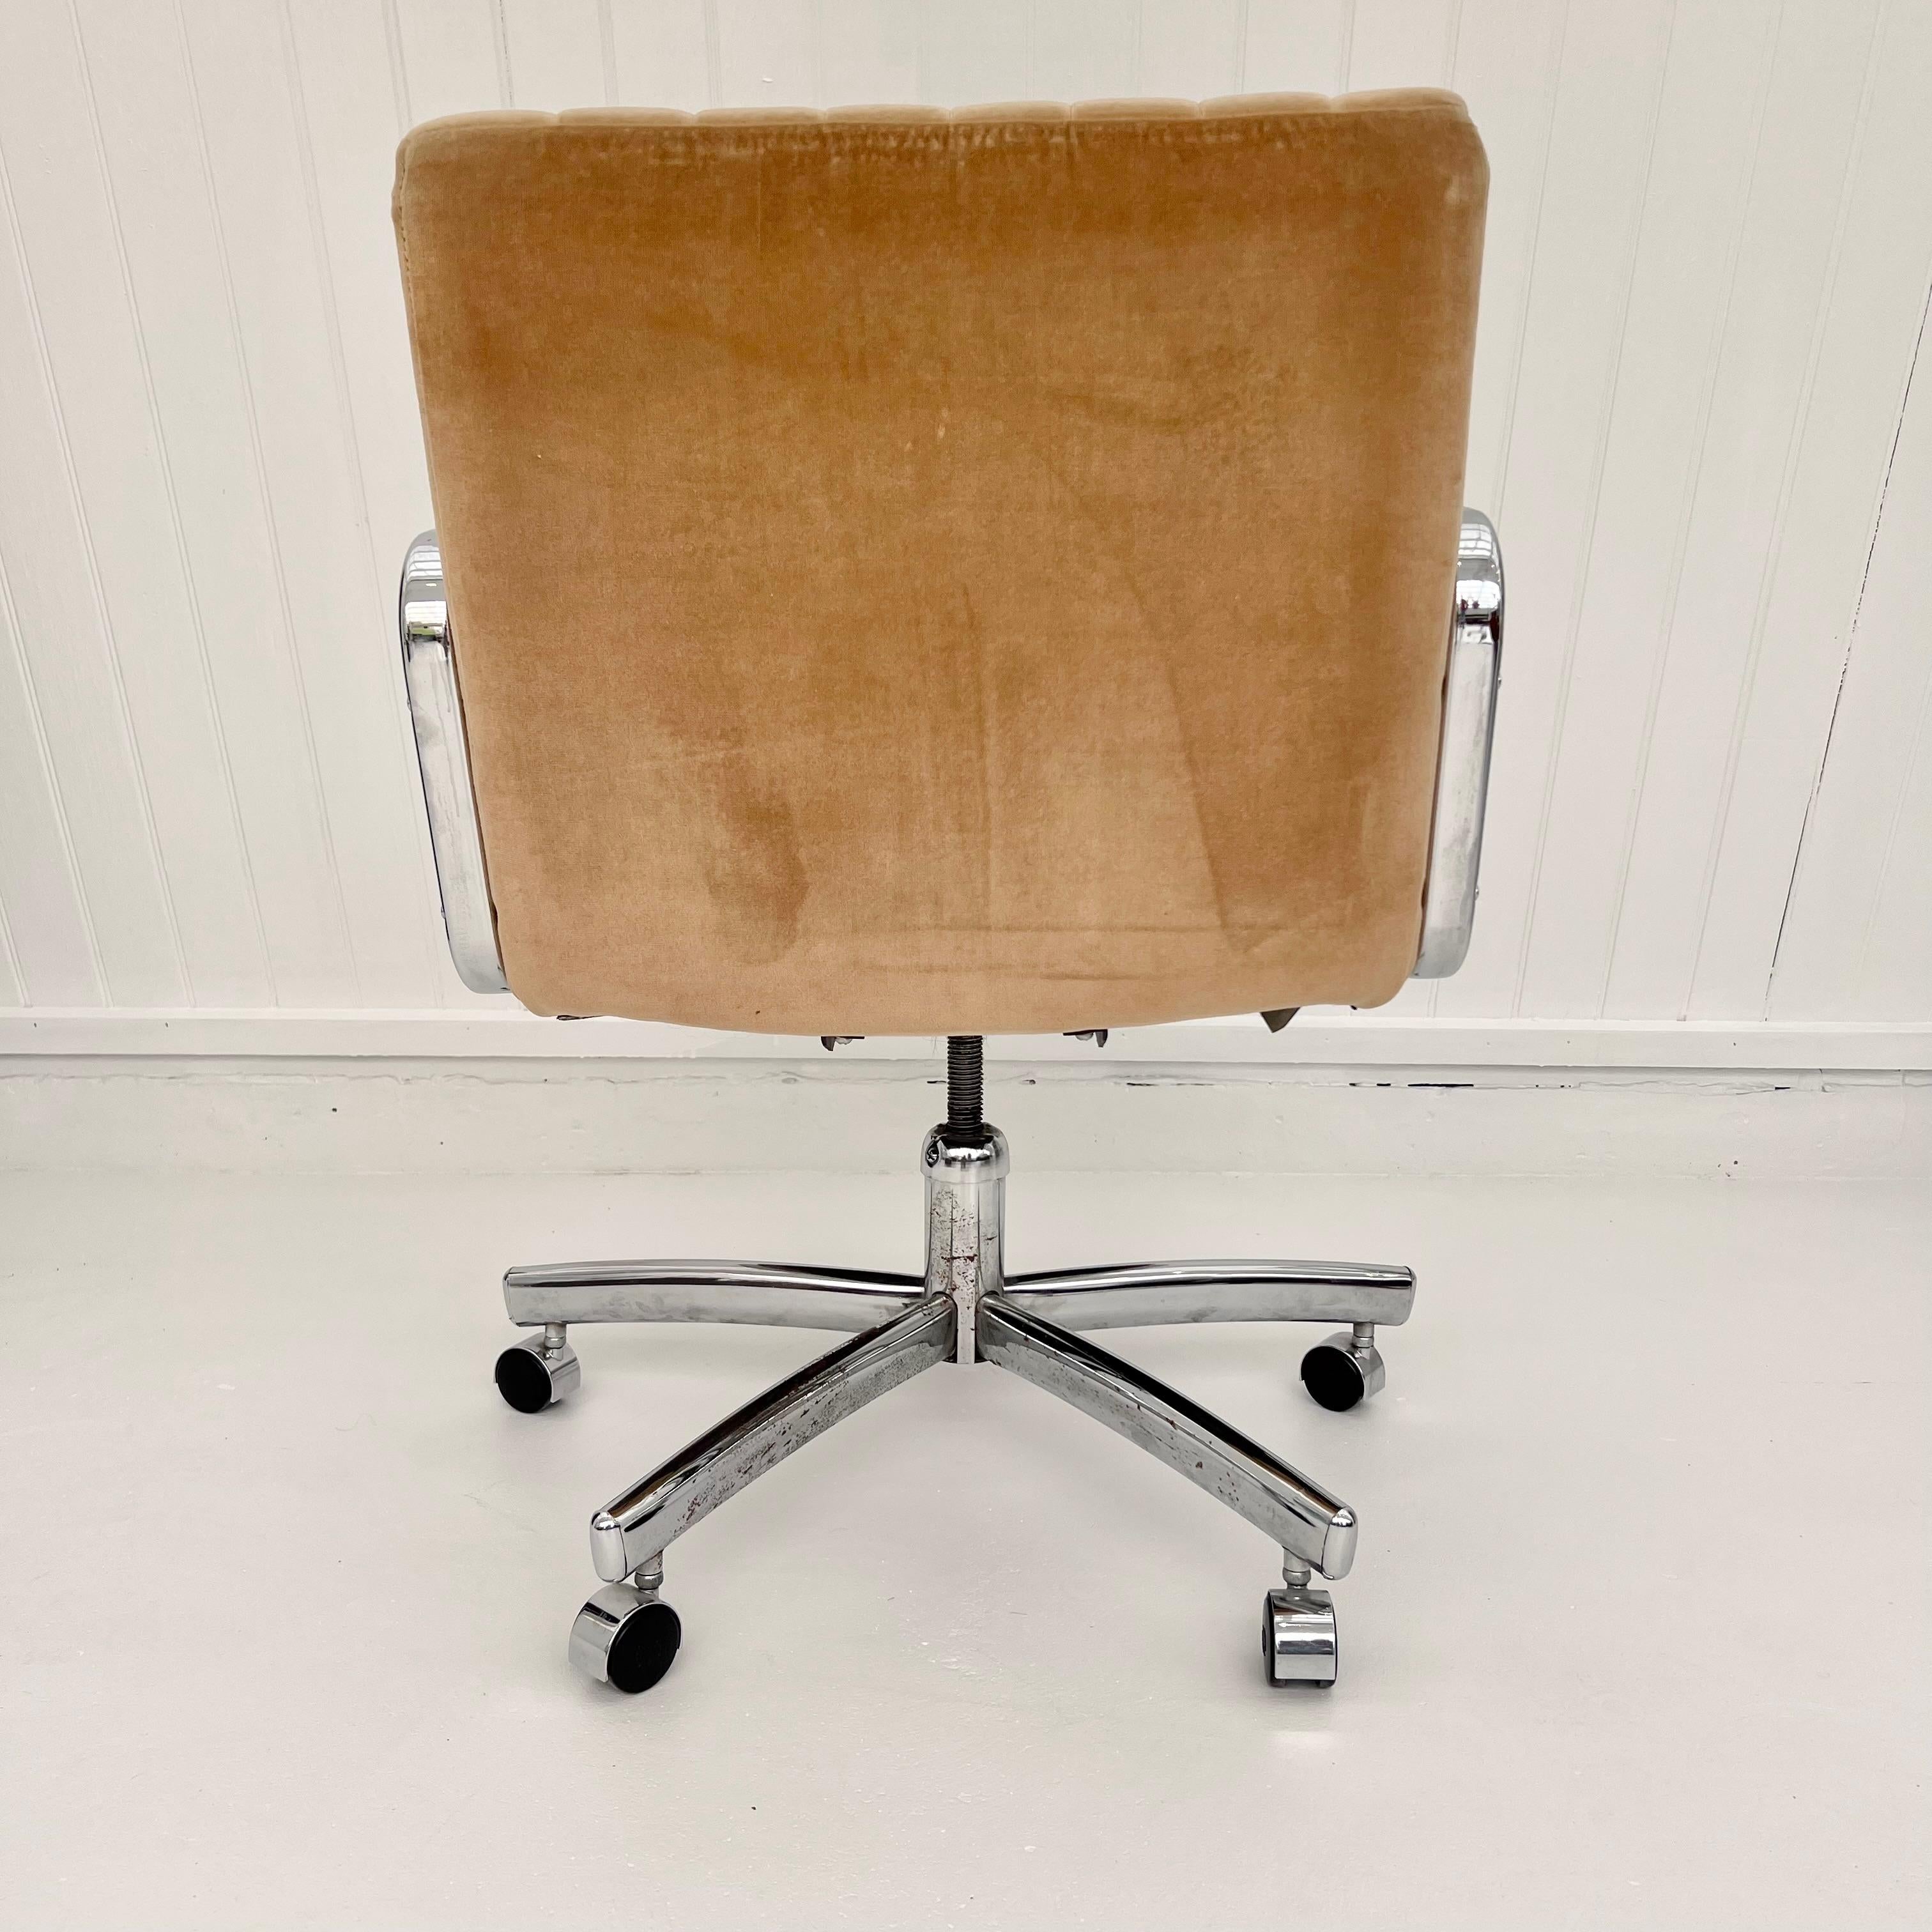 80's office chair